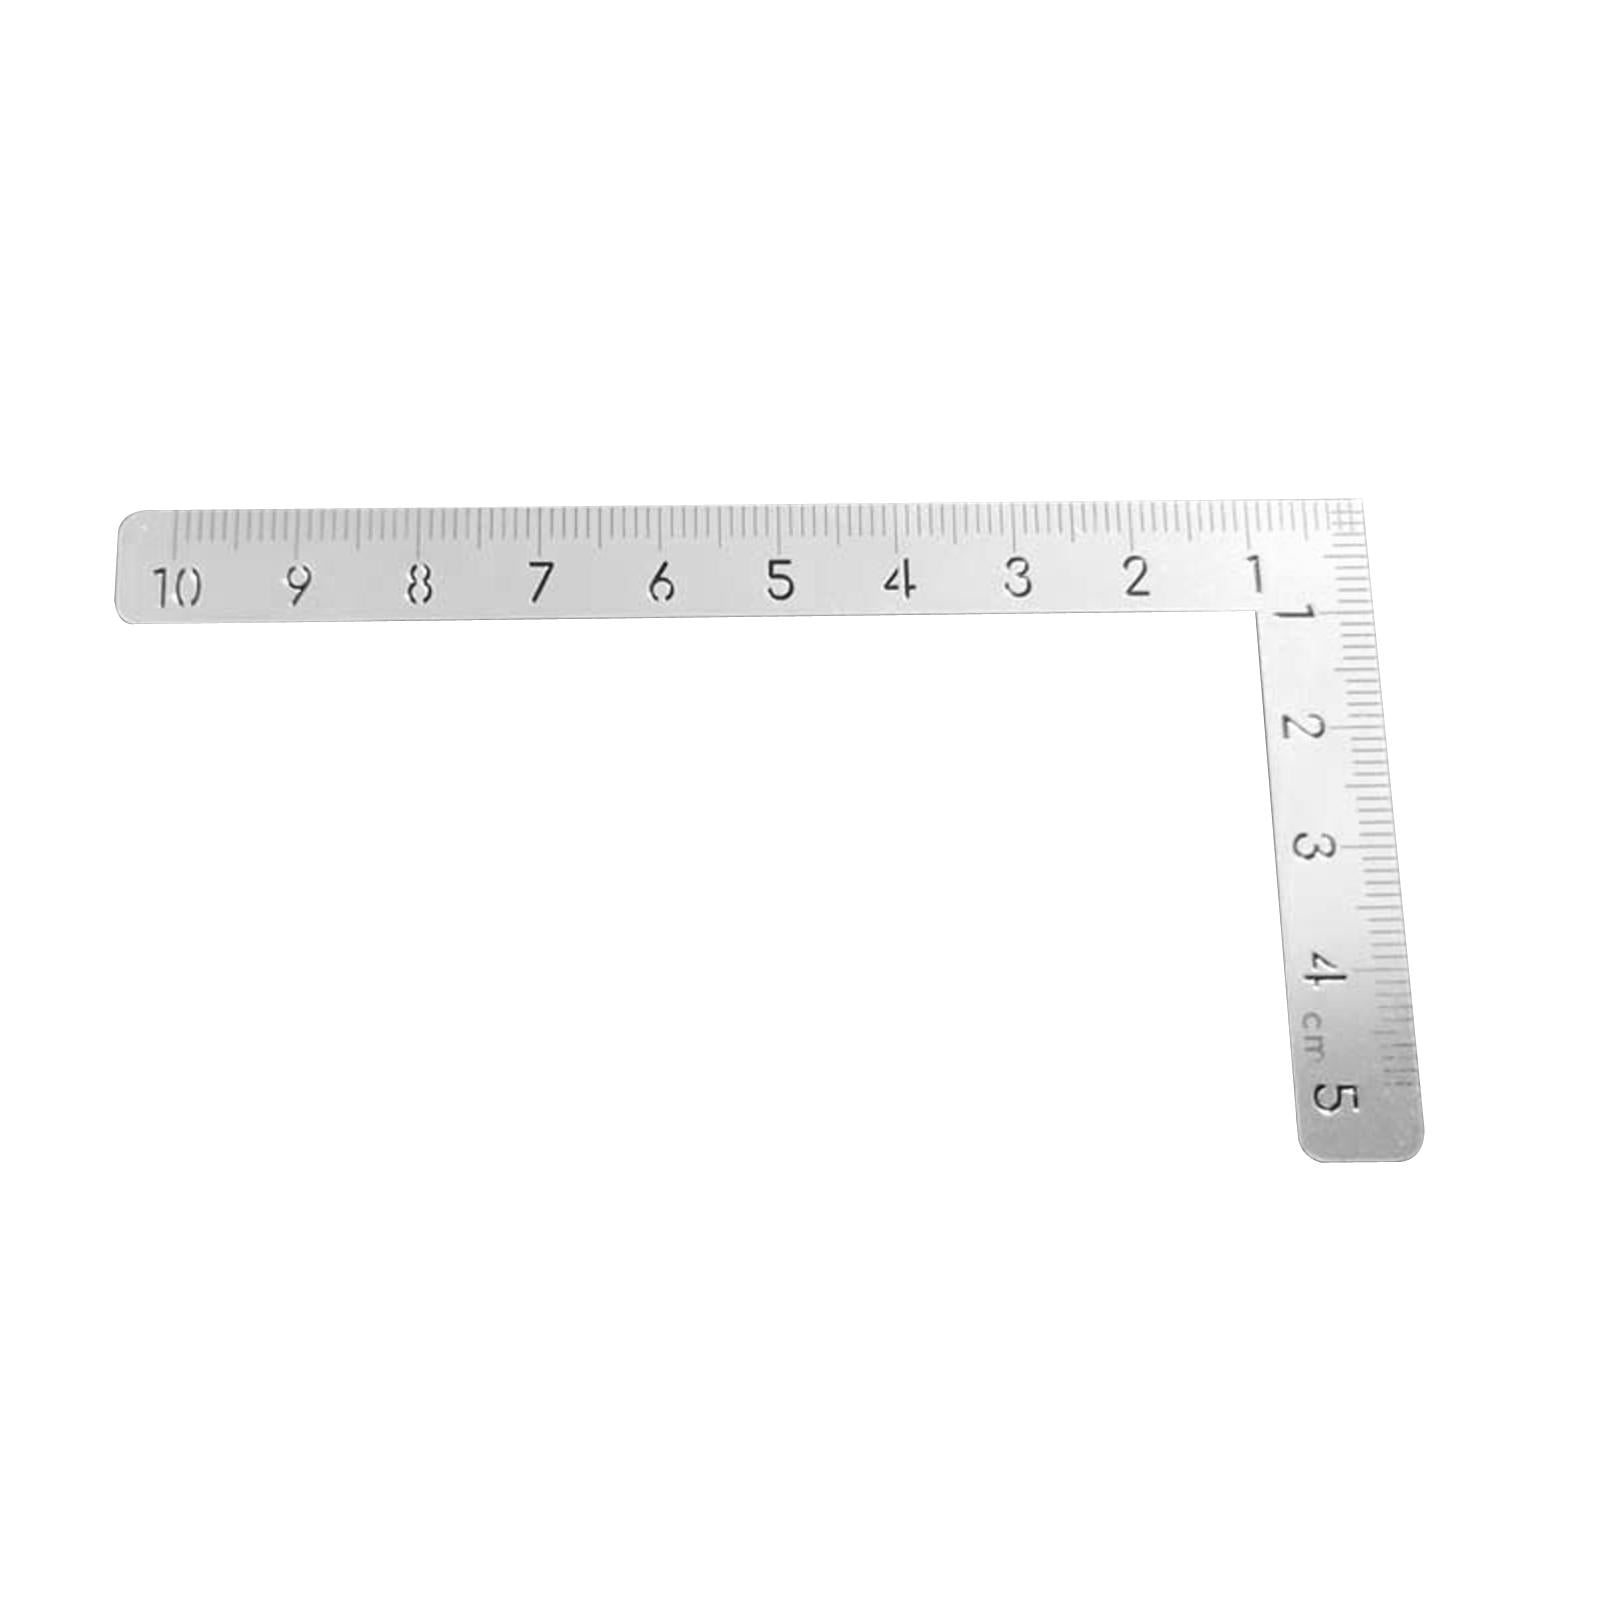 SEEKFUNNING Mini Framing Ruler Measuring Layout Tool Stainless Steel Square  Right Angle Ruler Precision for Building Framing Gauges Ruler 5*10CM